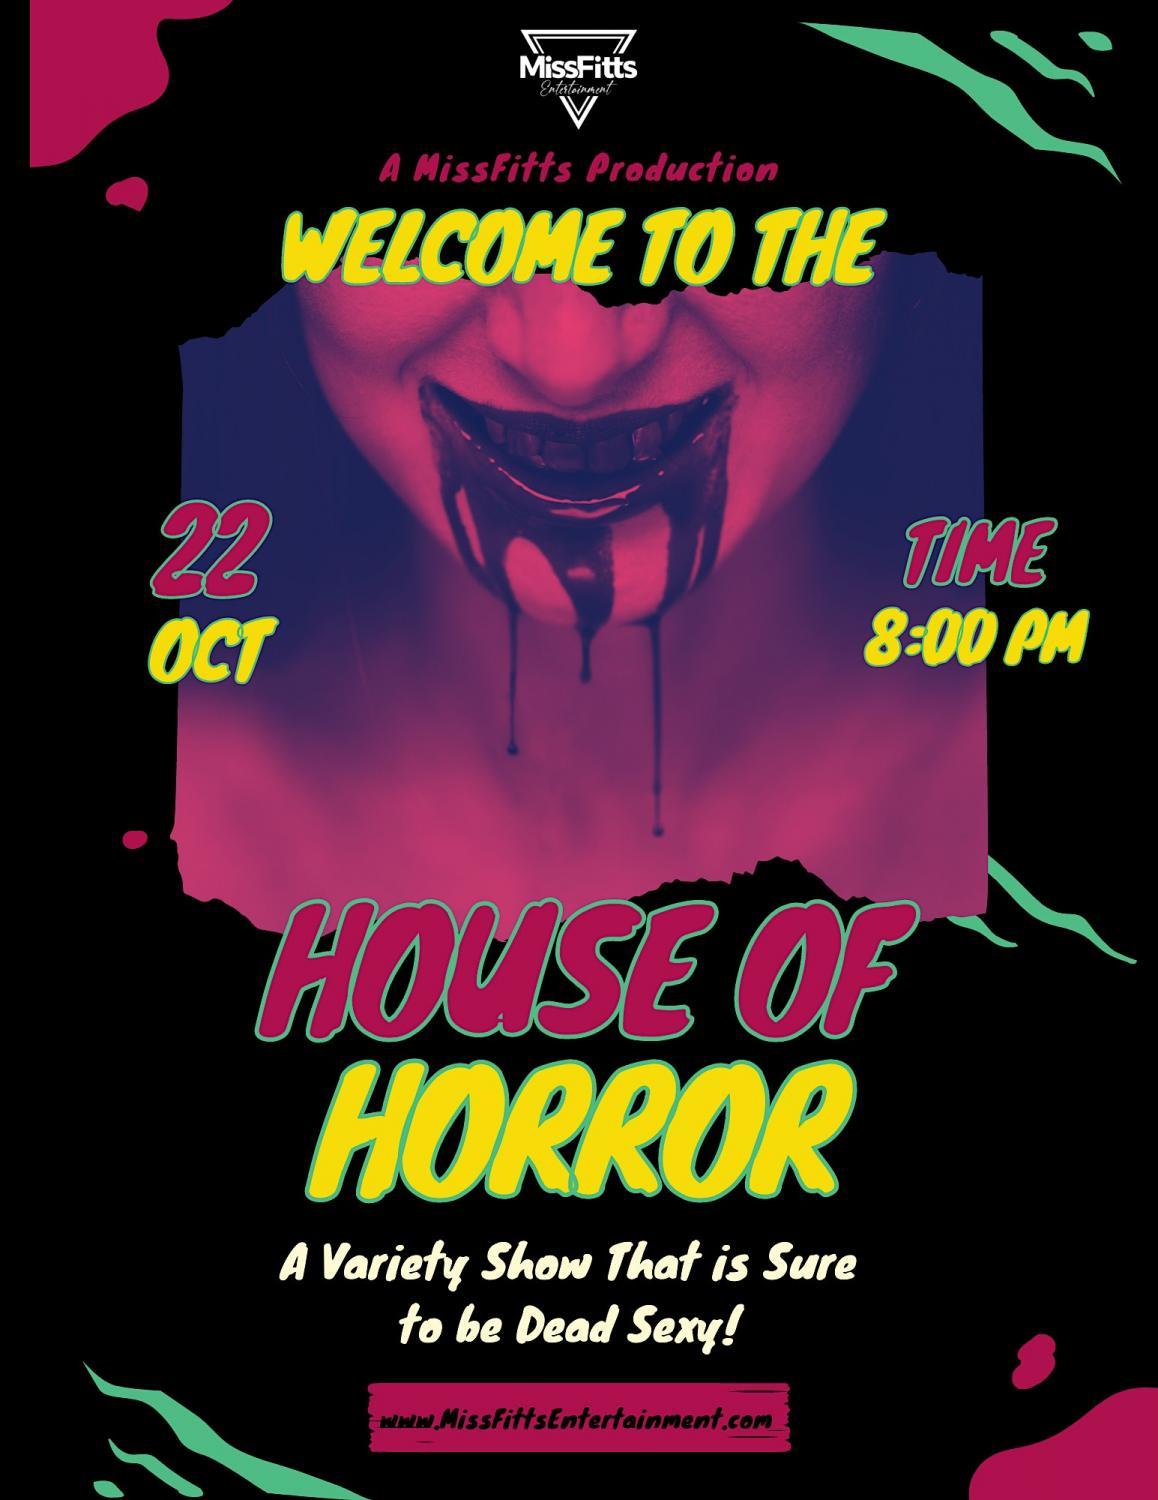 MissFitt's House of Horror, A Halloween Special
Sat Oct 22, 7:00 PM - Sat Oct 22, 7:00 PM
in 2 days